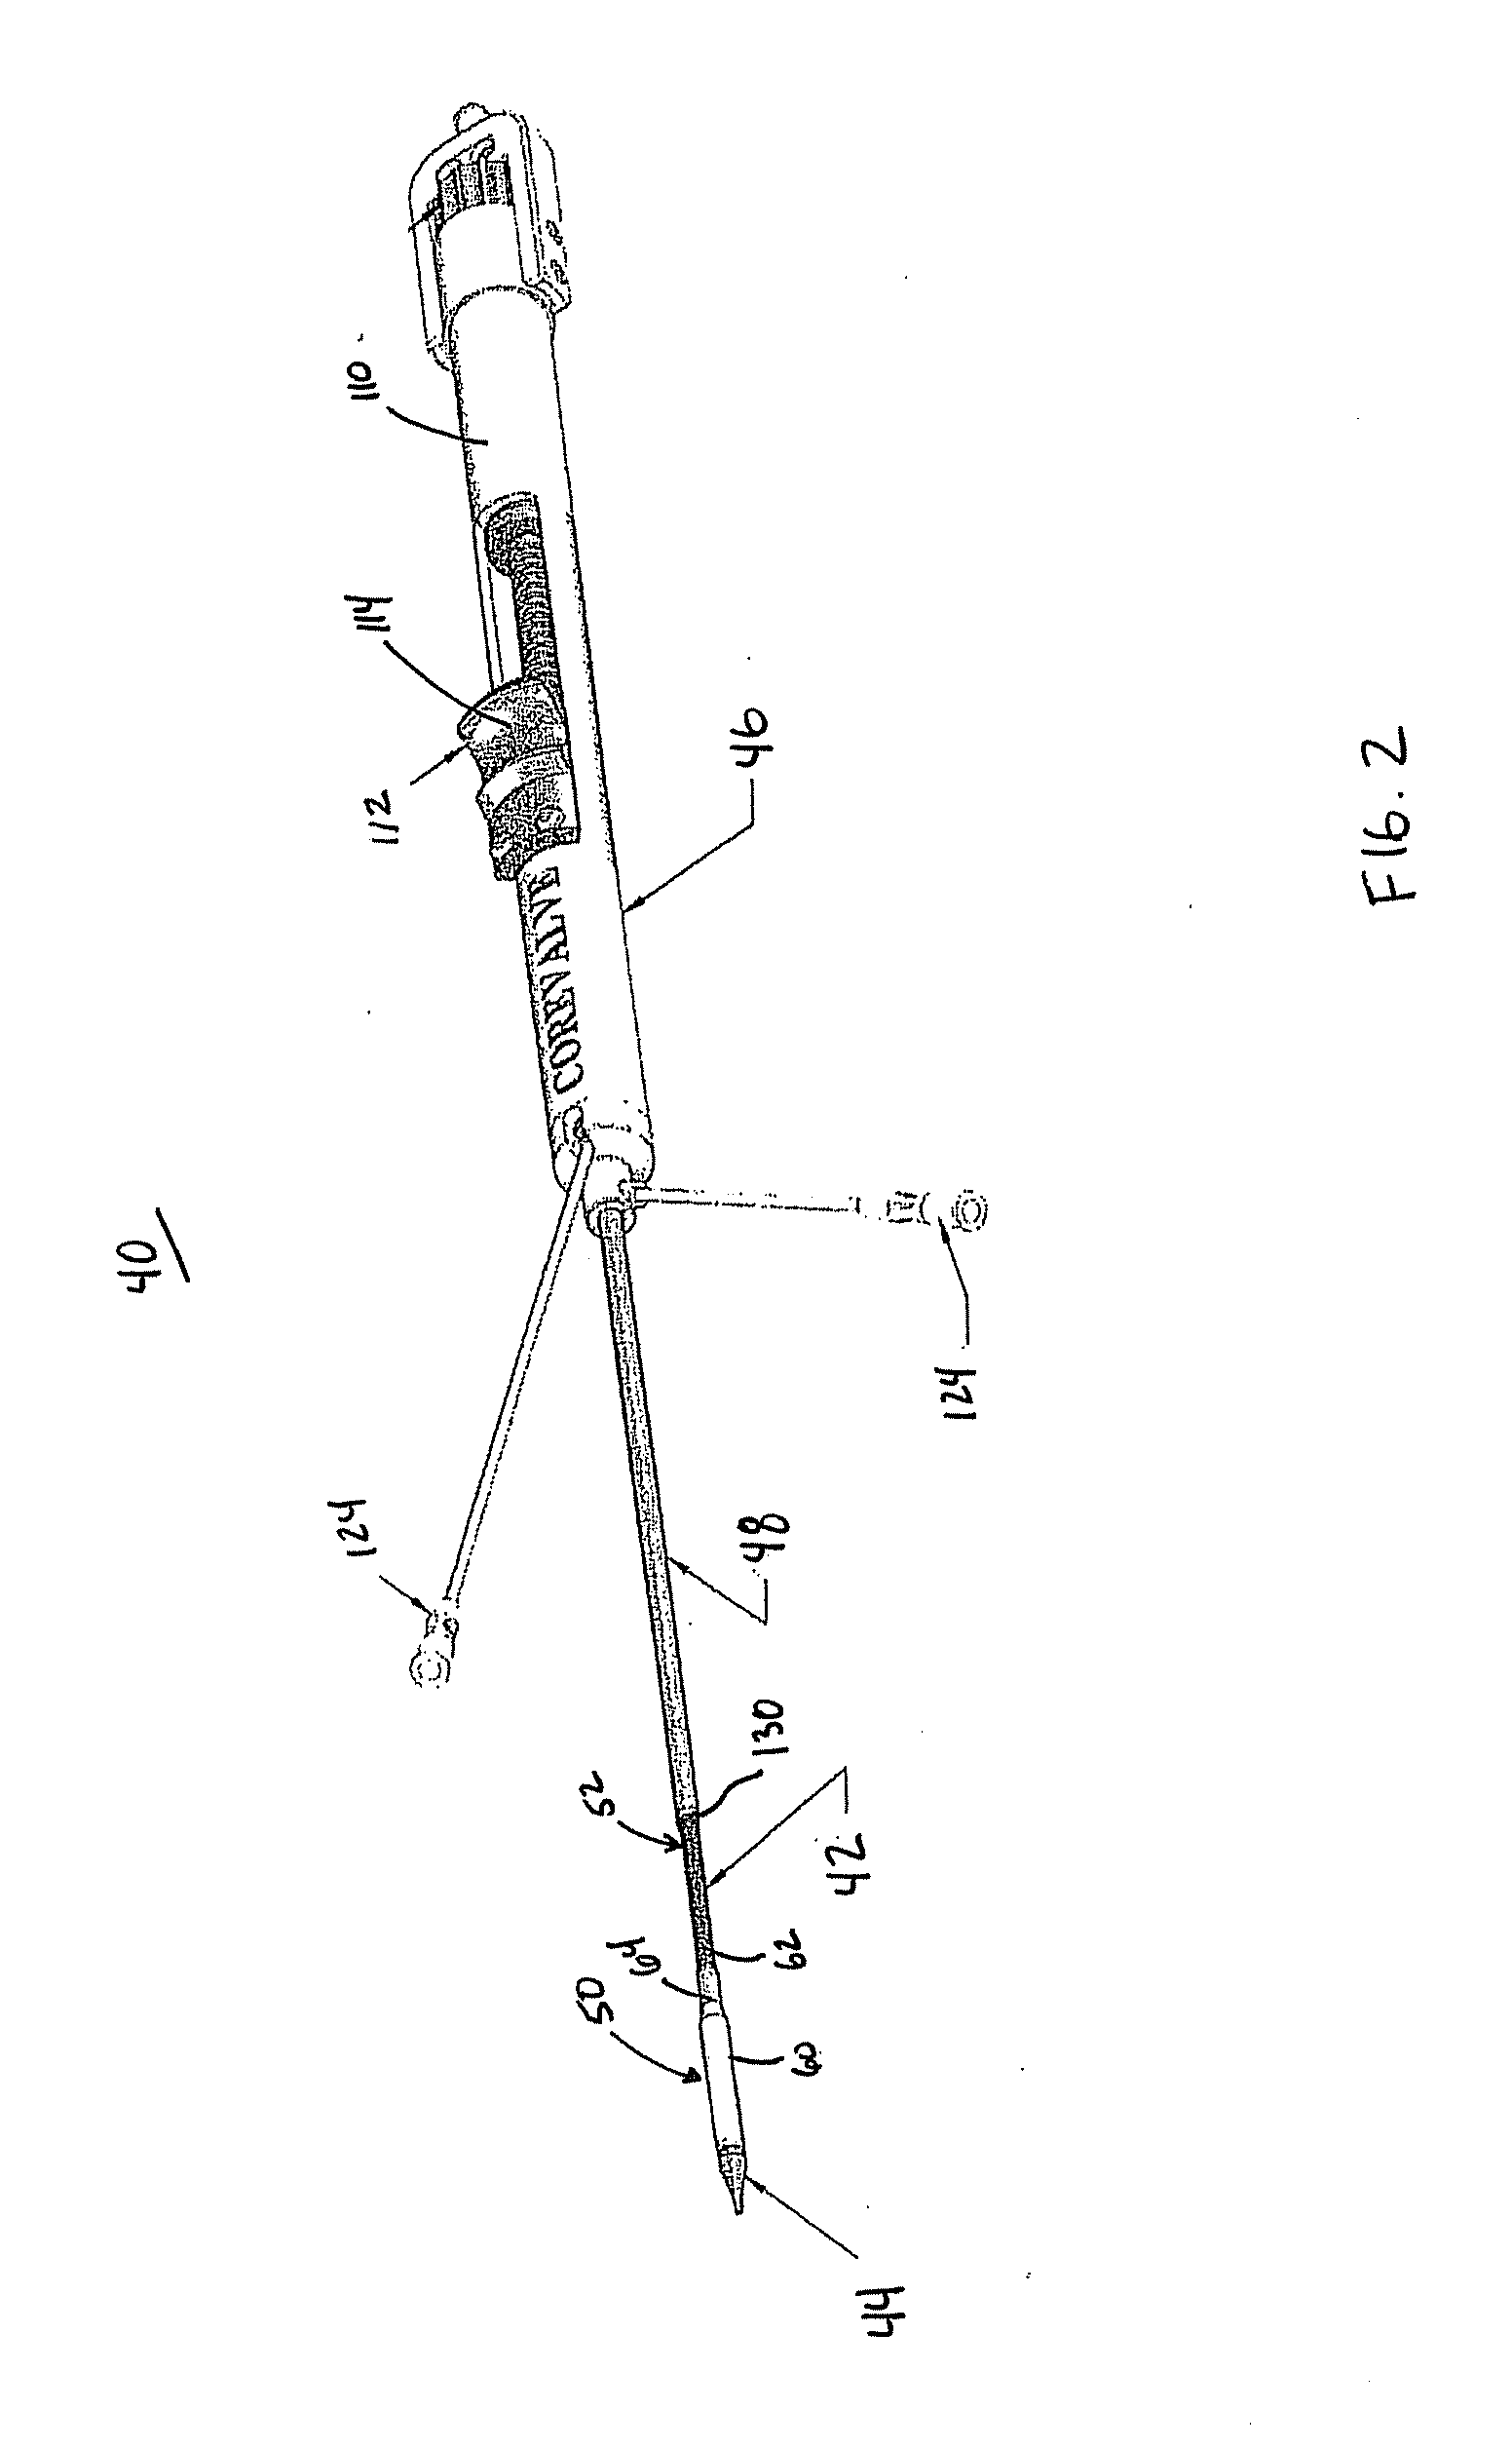 Transcatheter Heart Valve Delivery System With Reduced Area Moment of Inertia